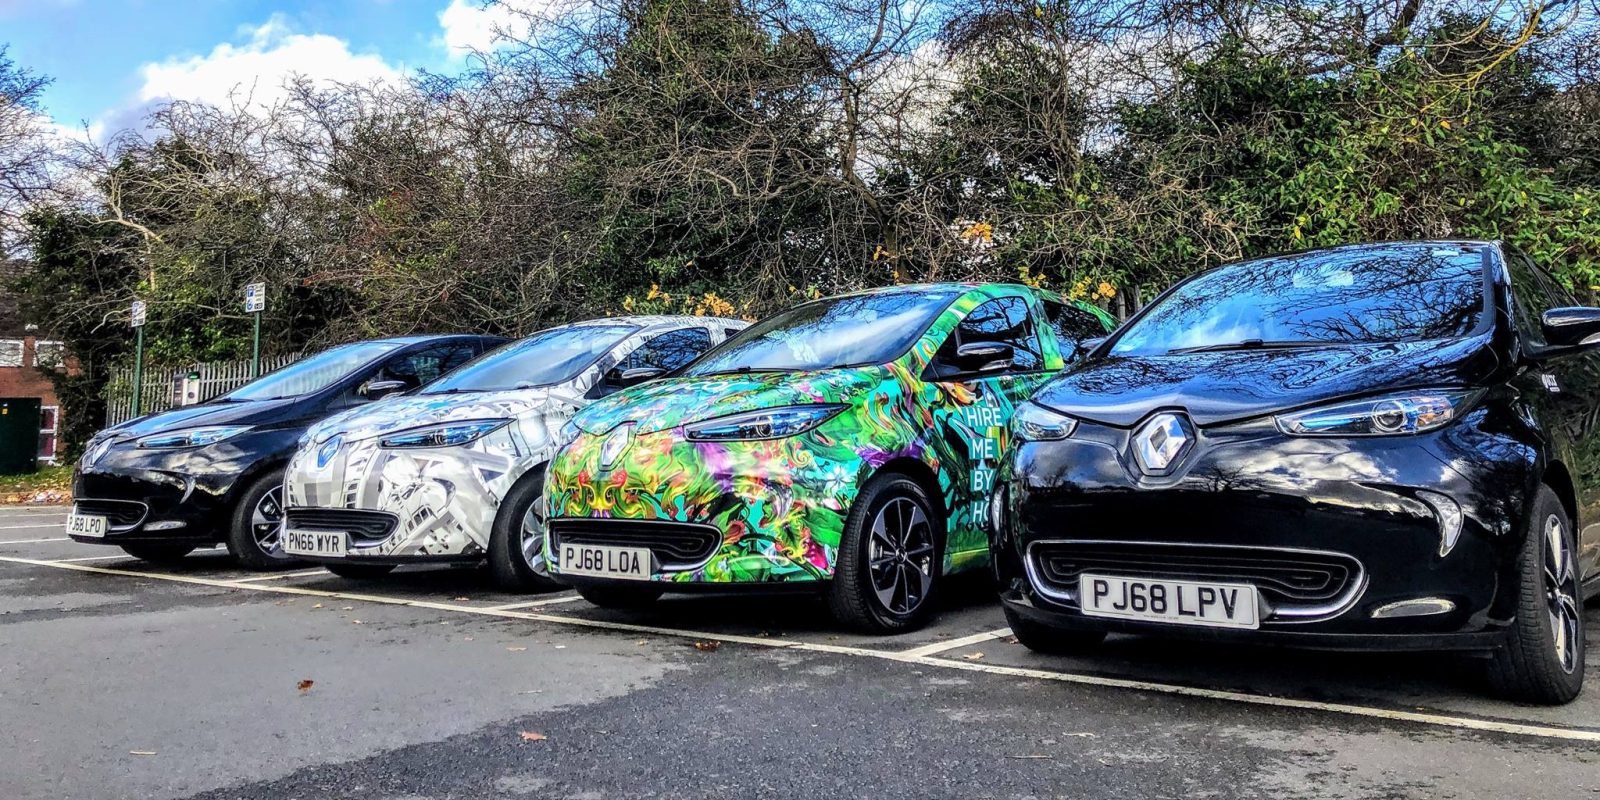 Renault ZOEs in an electric car sharing program were targeted by vandals in the UK